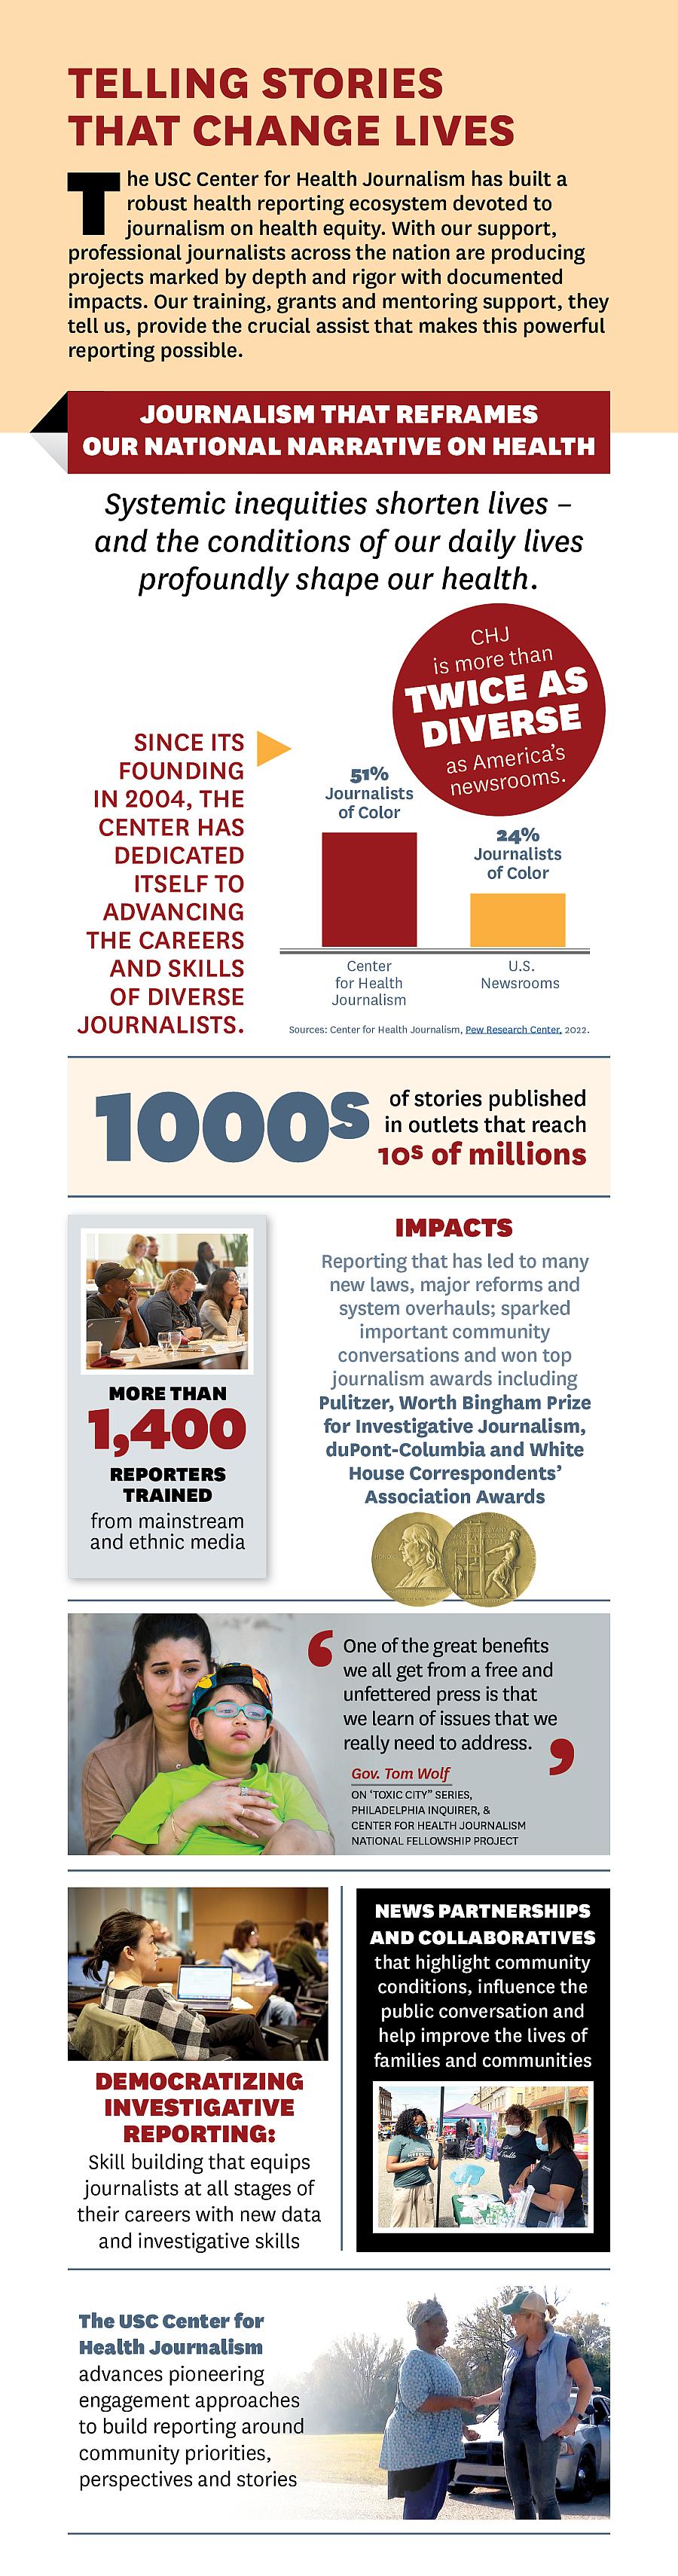 An infographic displaying the Center for Health Journalism's impacts on health and journalism.